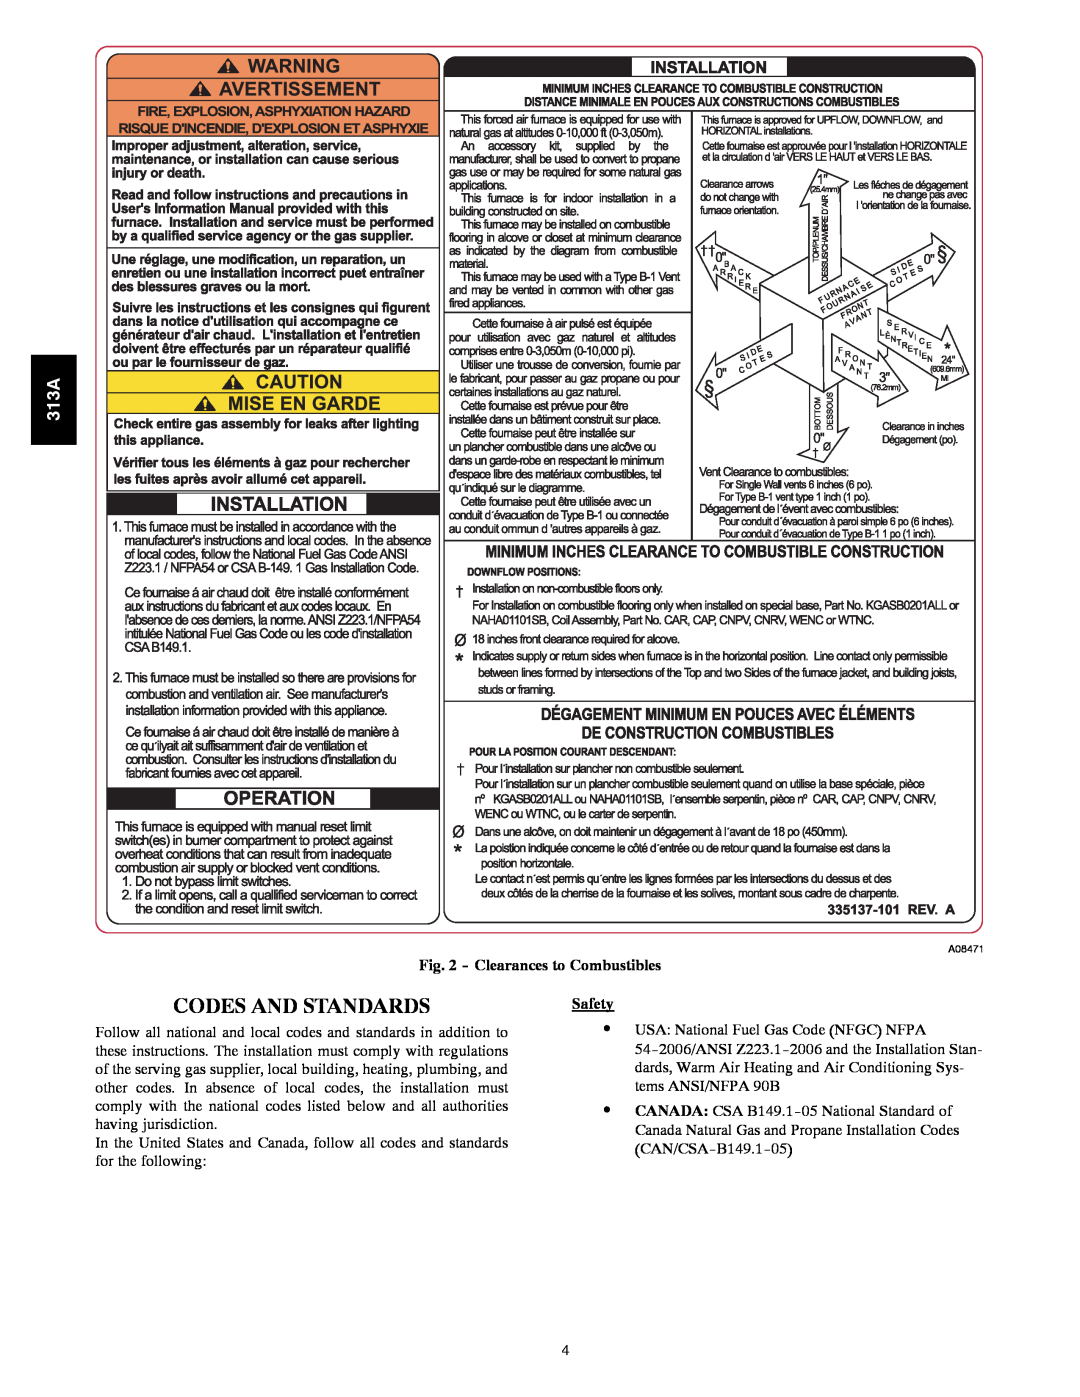 Bryant 313AAV instruction manual Codes And Standards, Clearances to Combustibles 